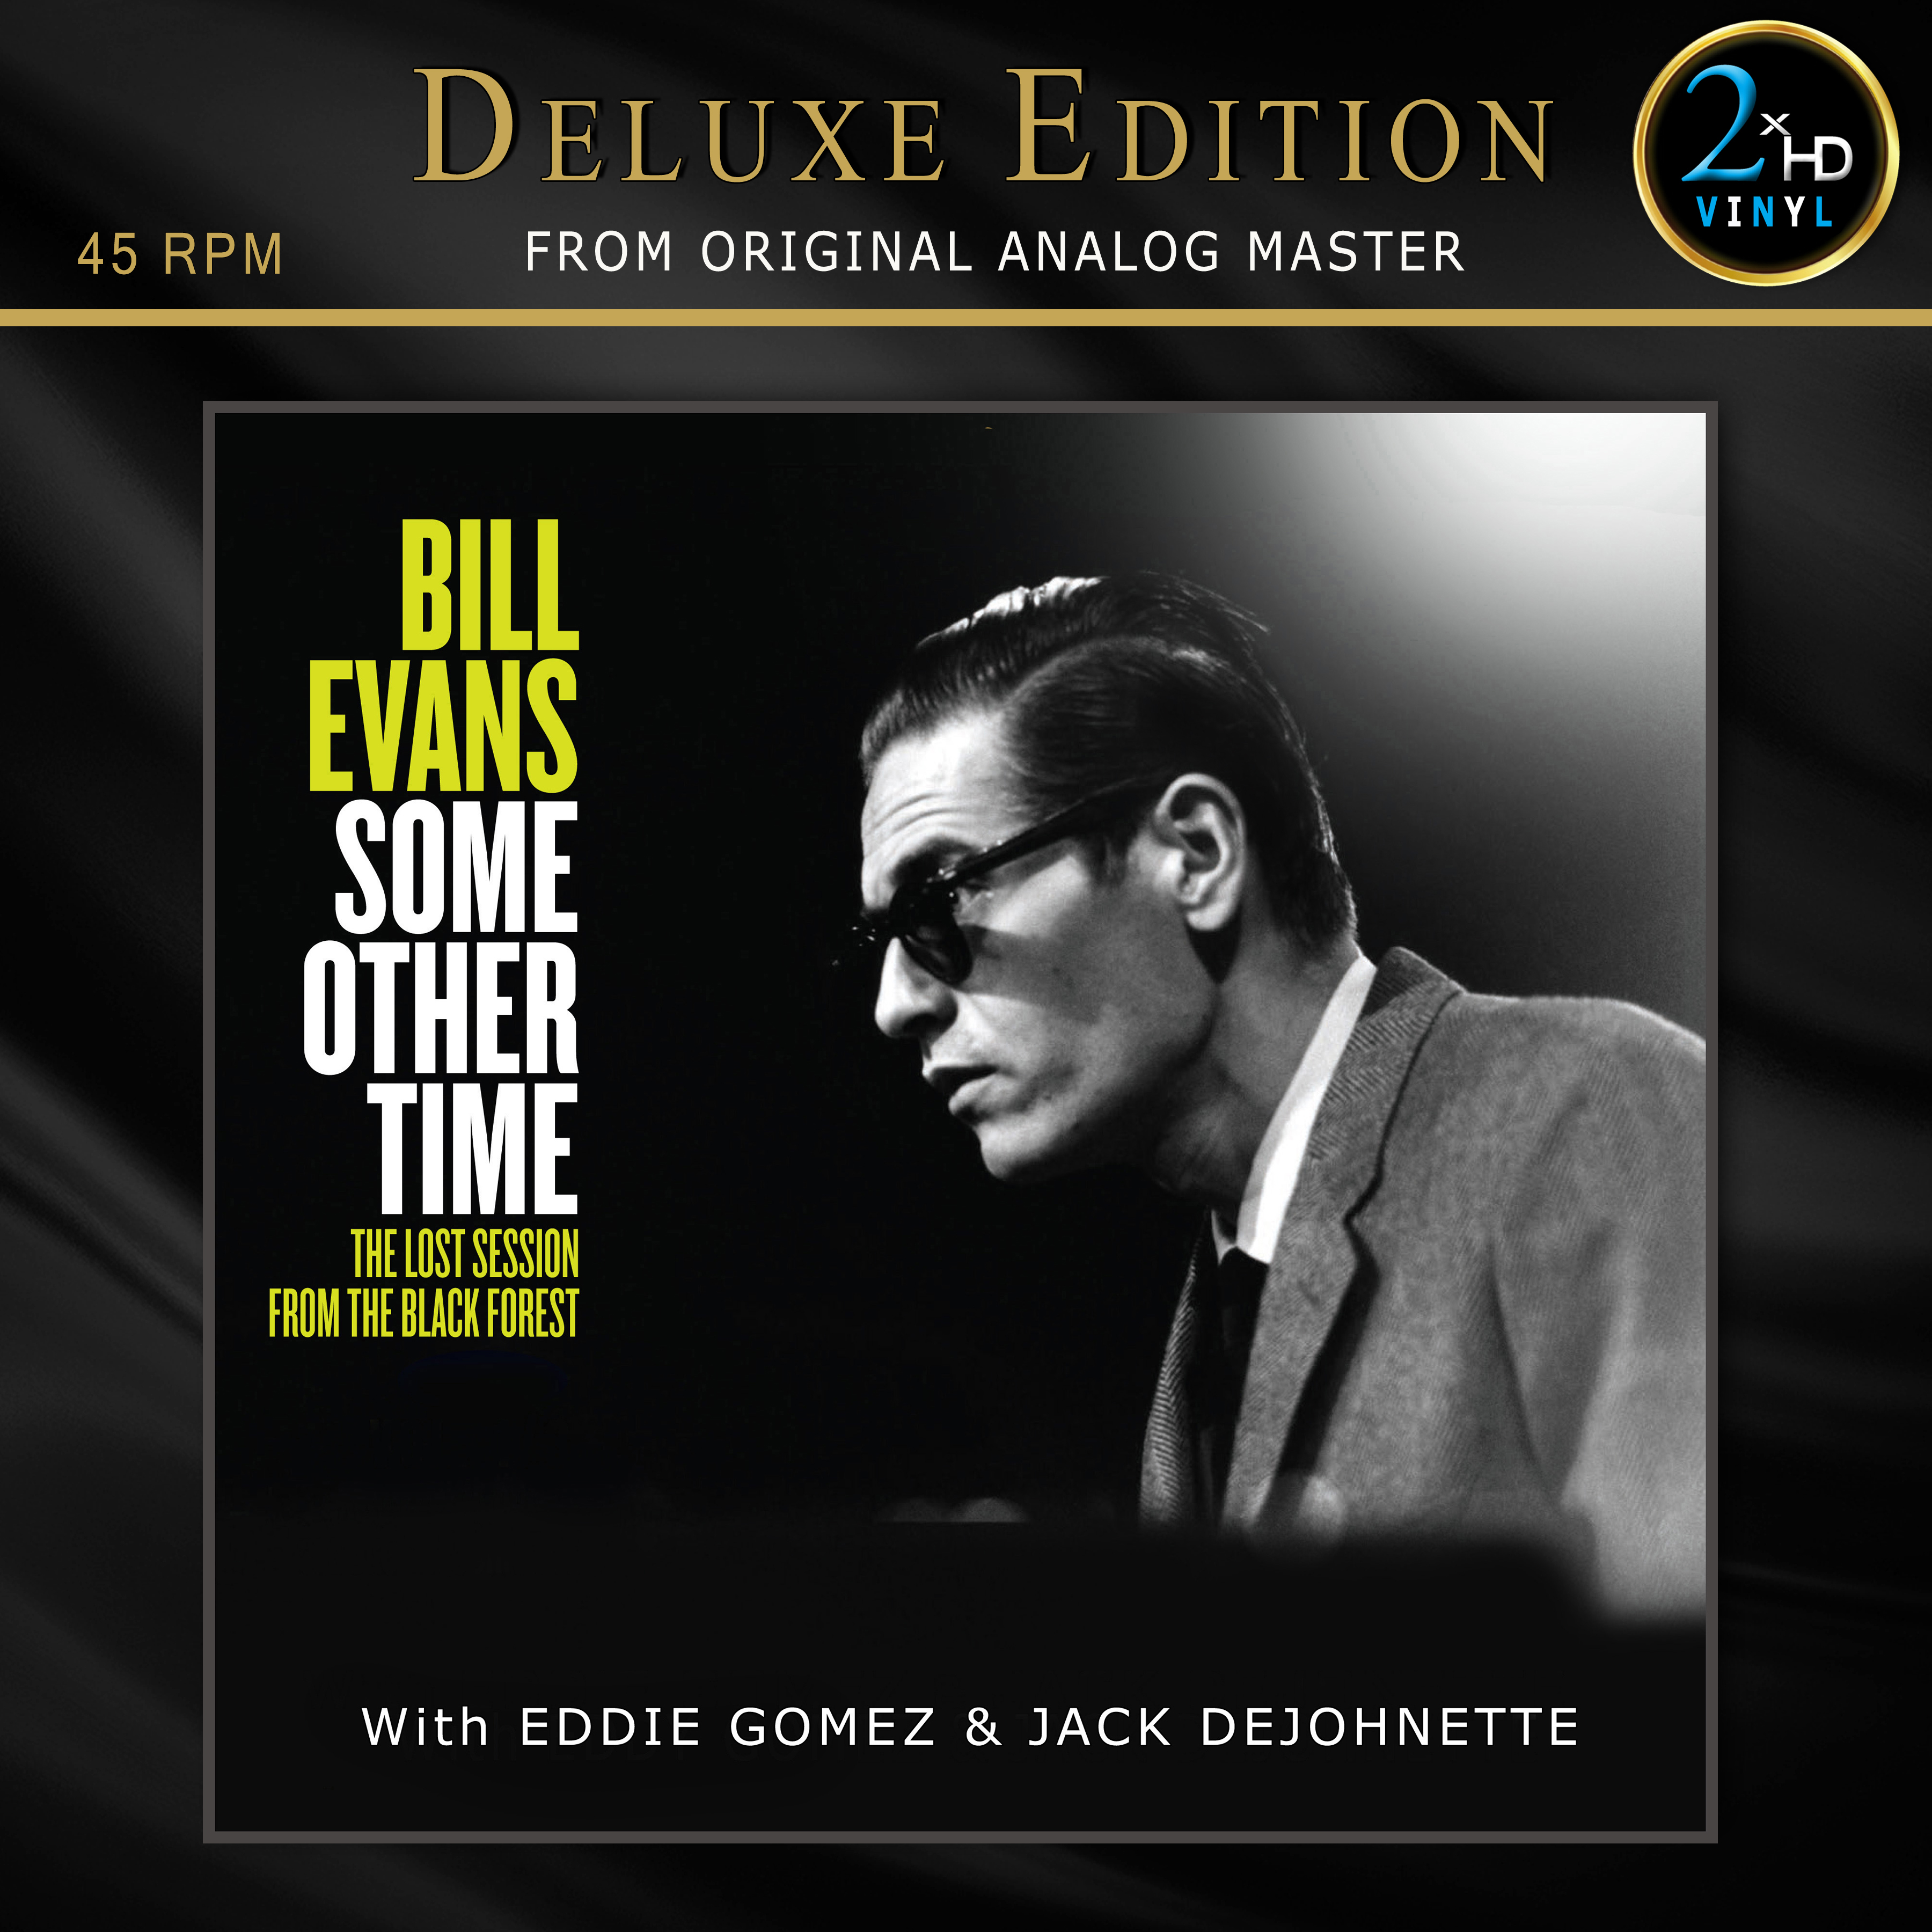 Bill Evans Some Other Time - The Lost Session From The Black Forest